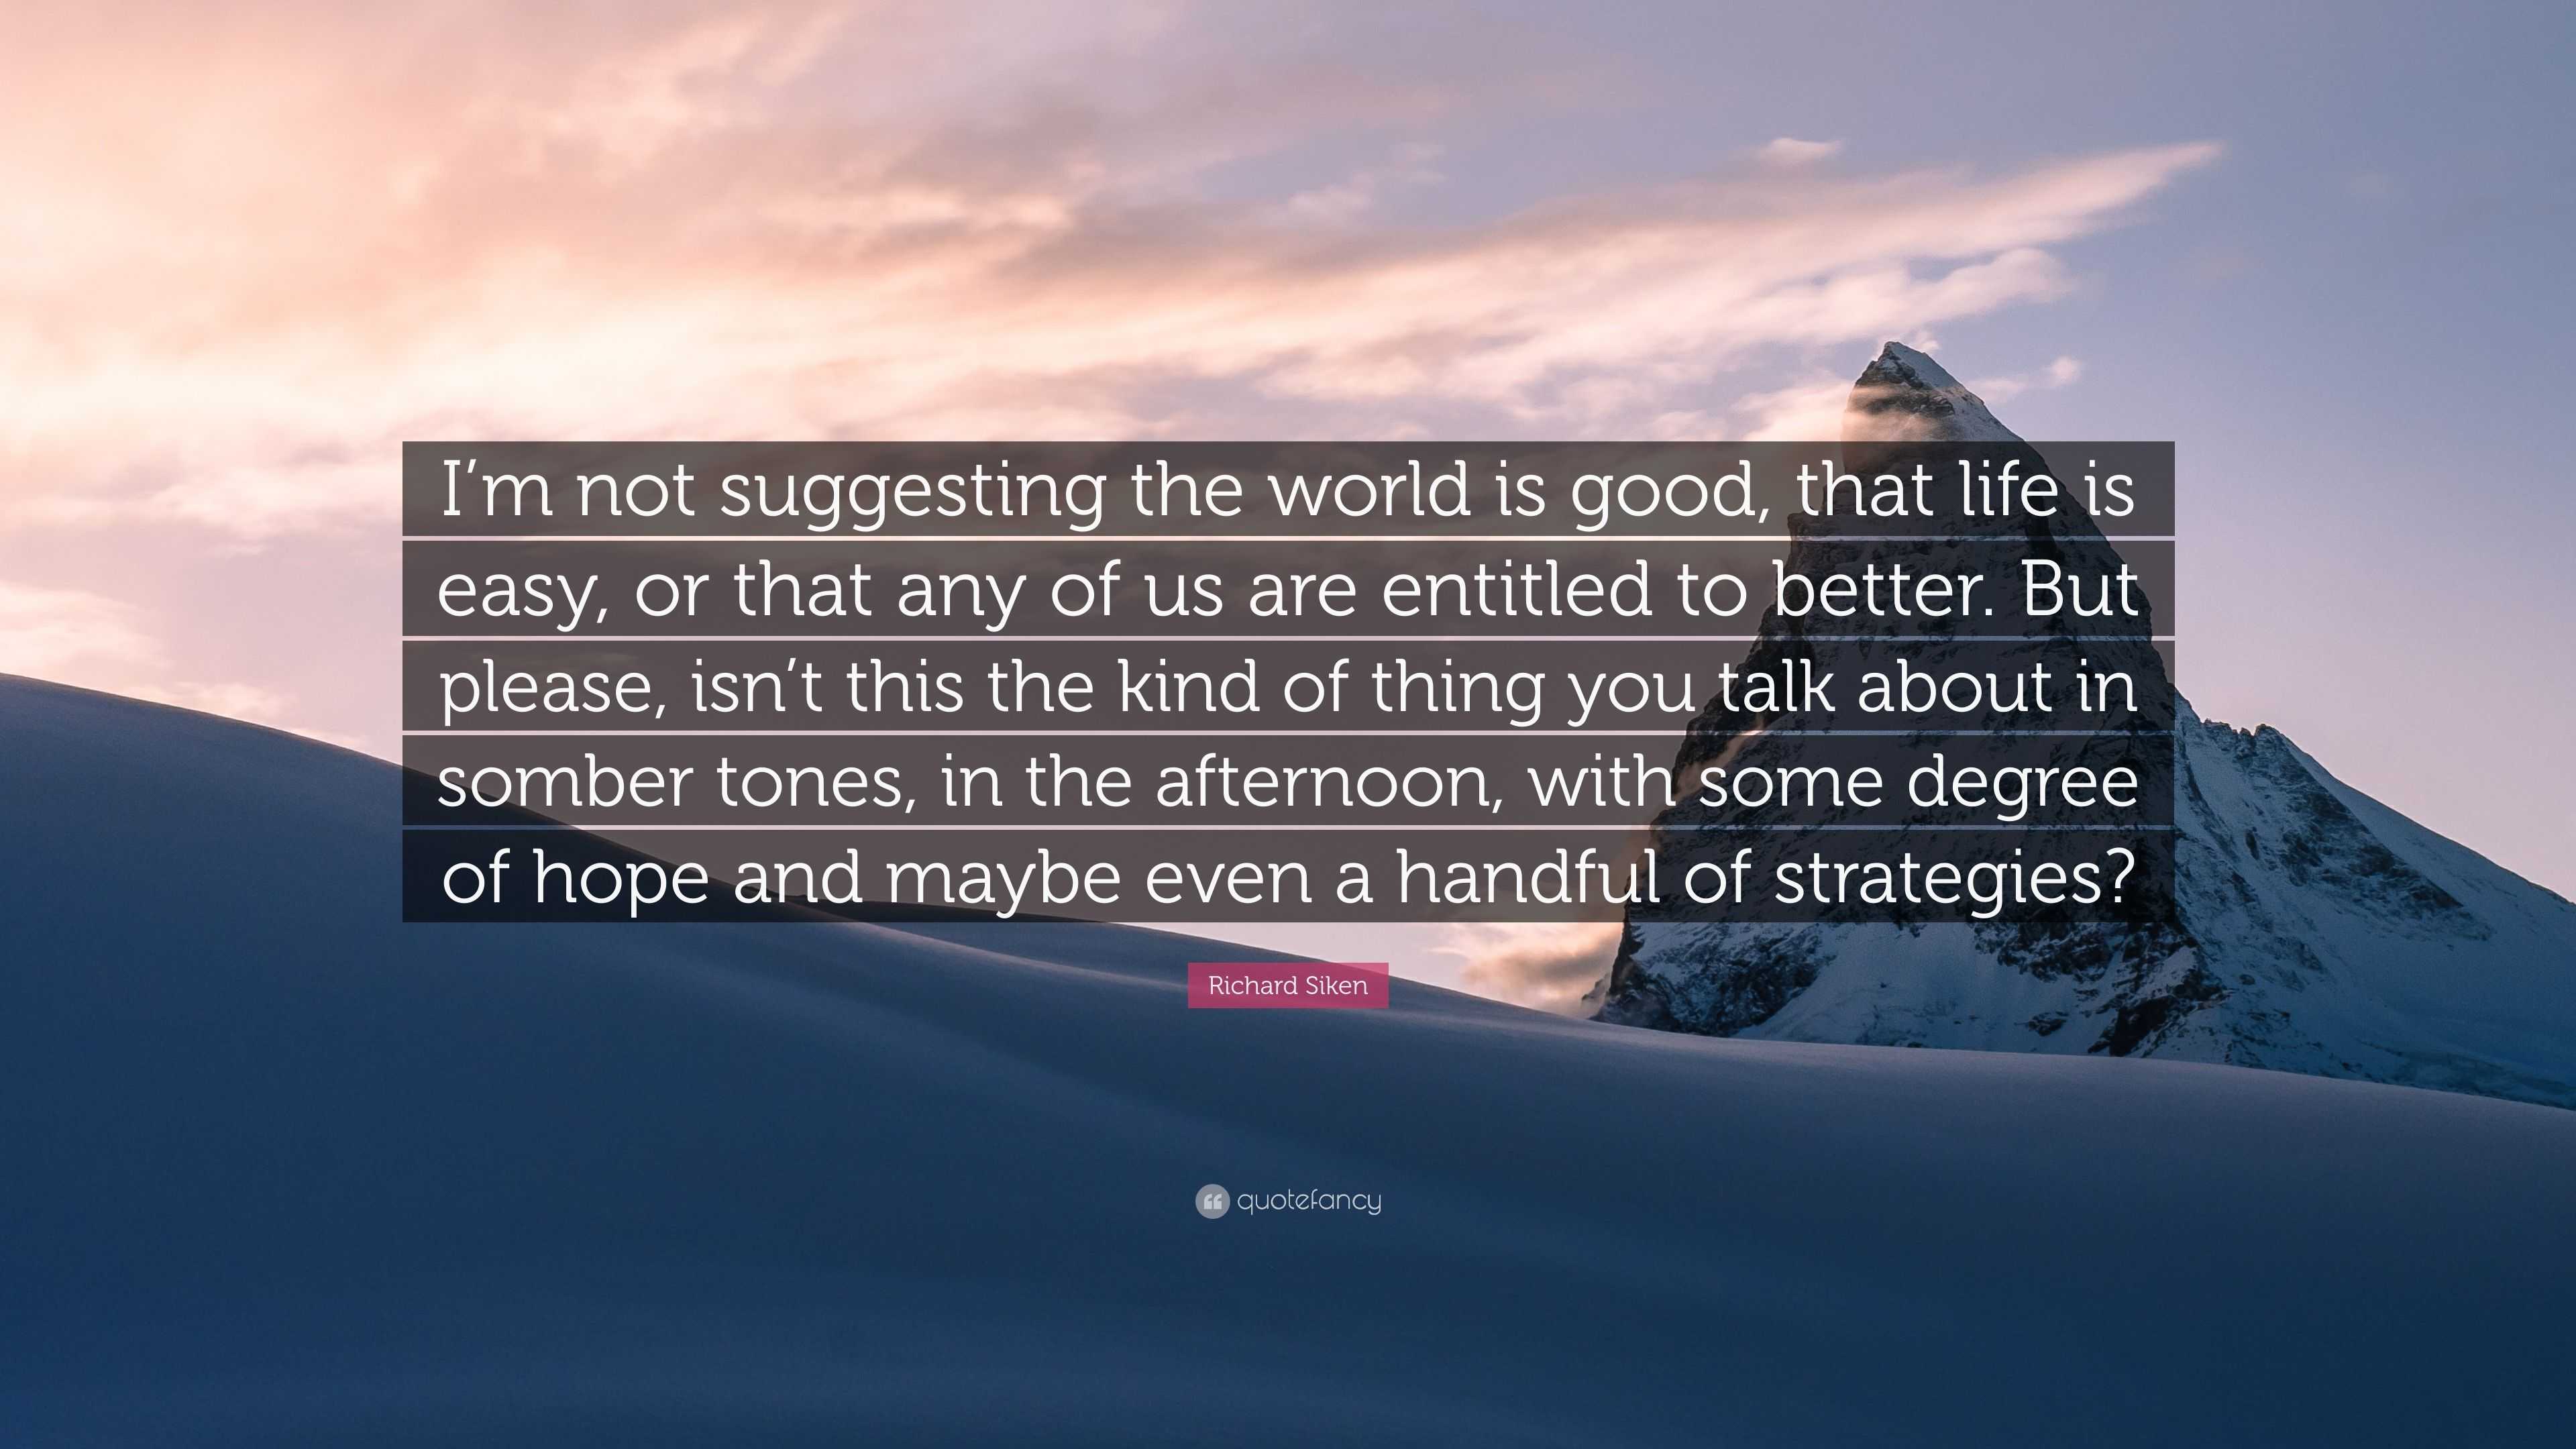 life is good quote richard siken quote u201ci u0027m not suggesting the world is good that